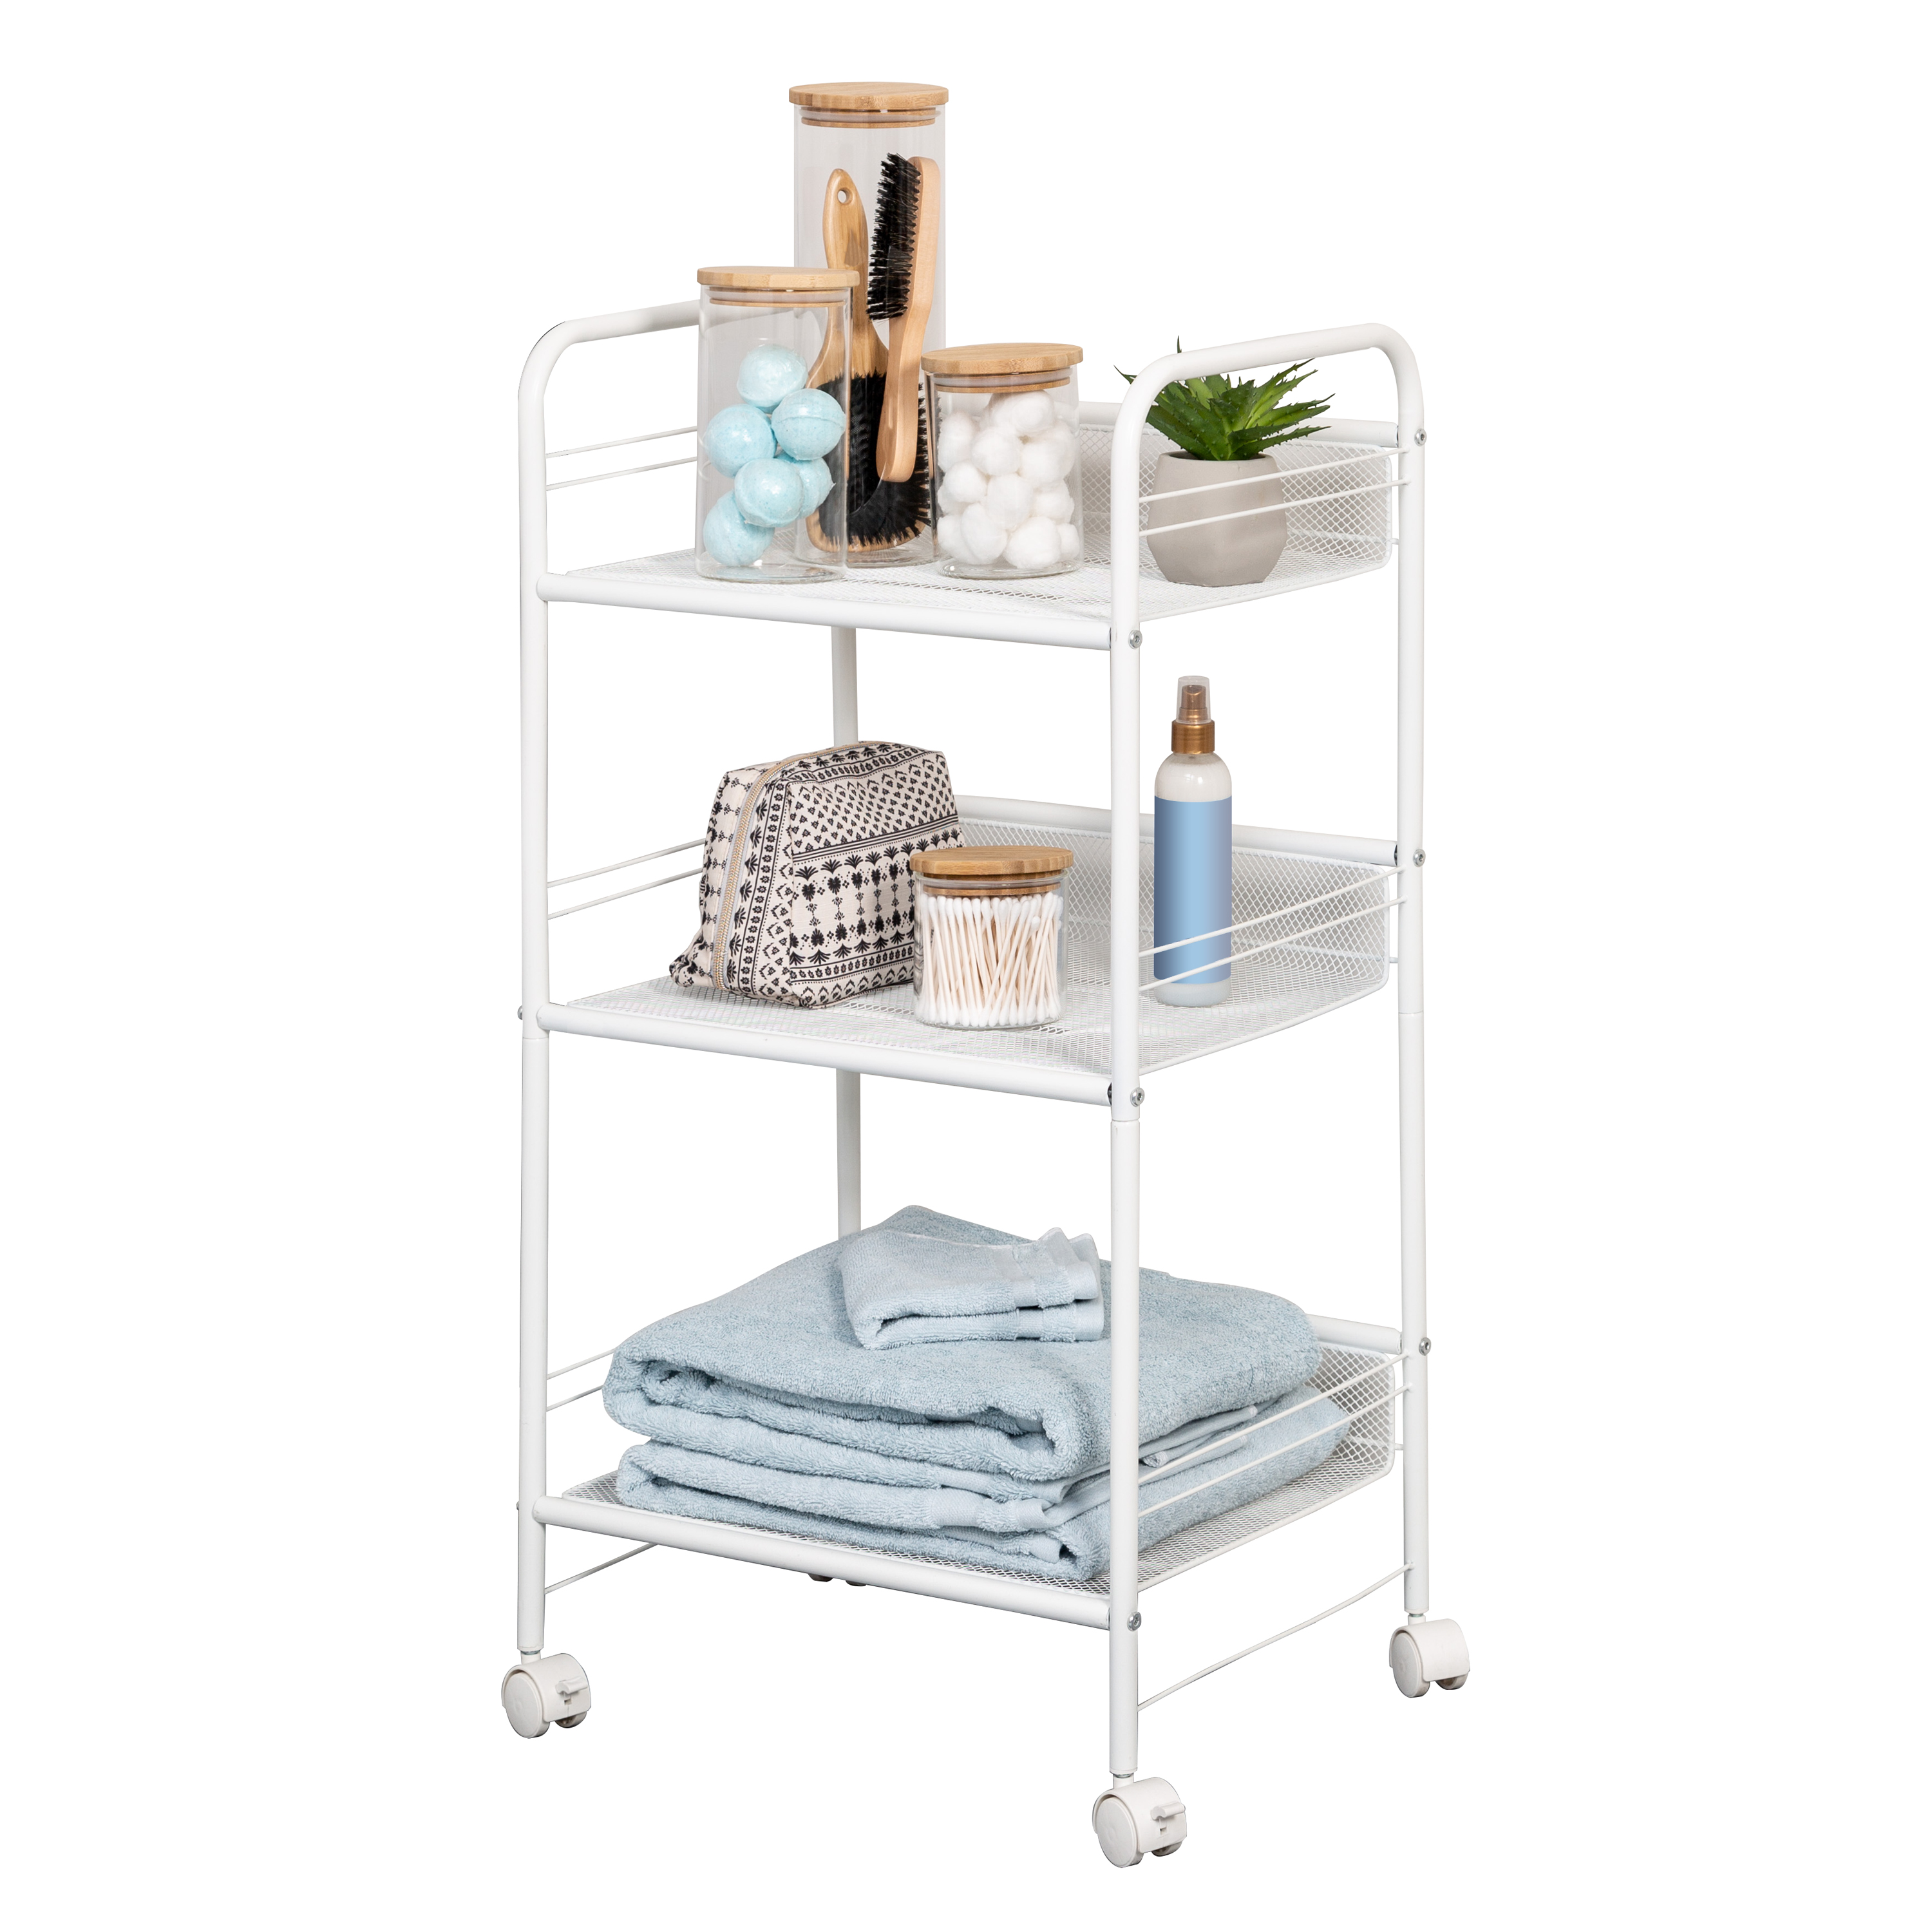 Honey-Can-Do 3-Tier Rolling Steel Wire Storage Cart with Lockable Wheels, White - image 3 of 8